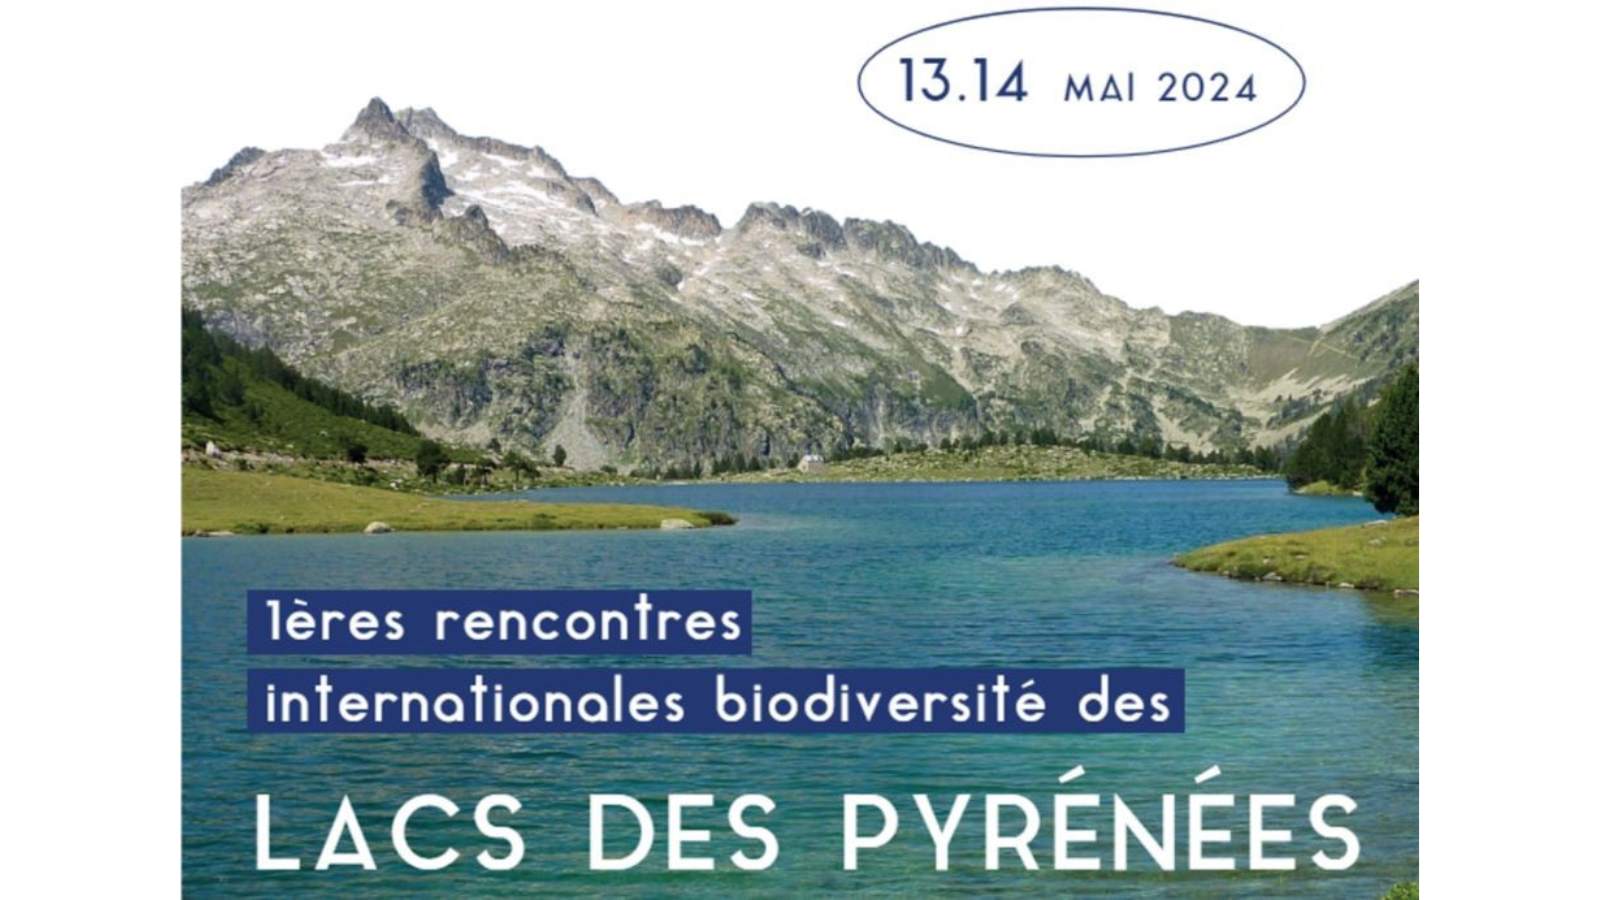 First International Meeting on the Biodiversity of the Pyrenean Lakes